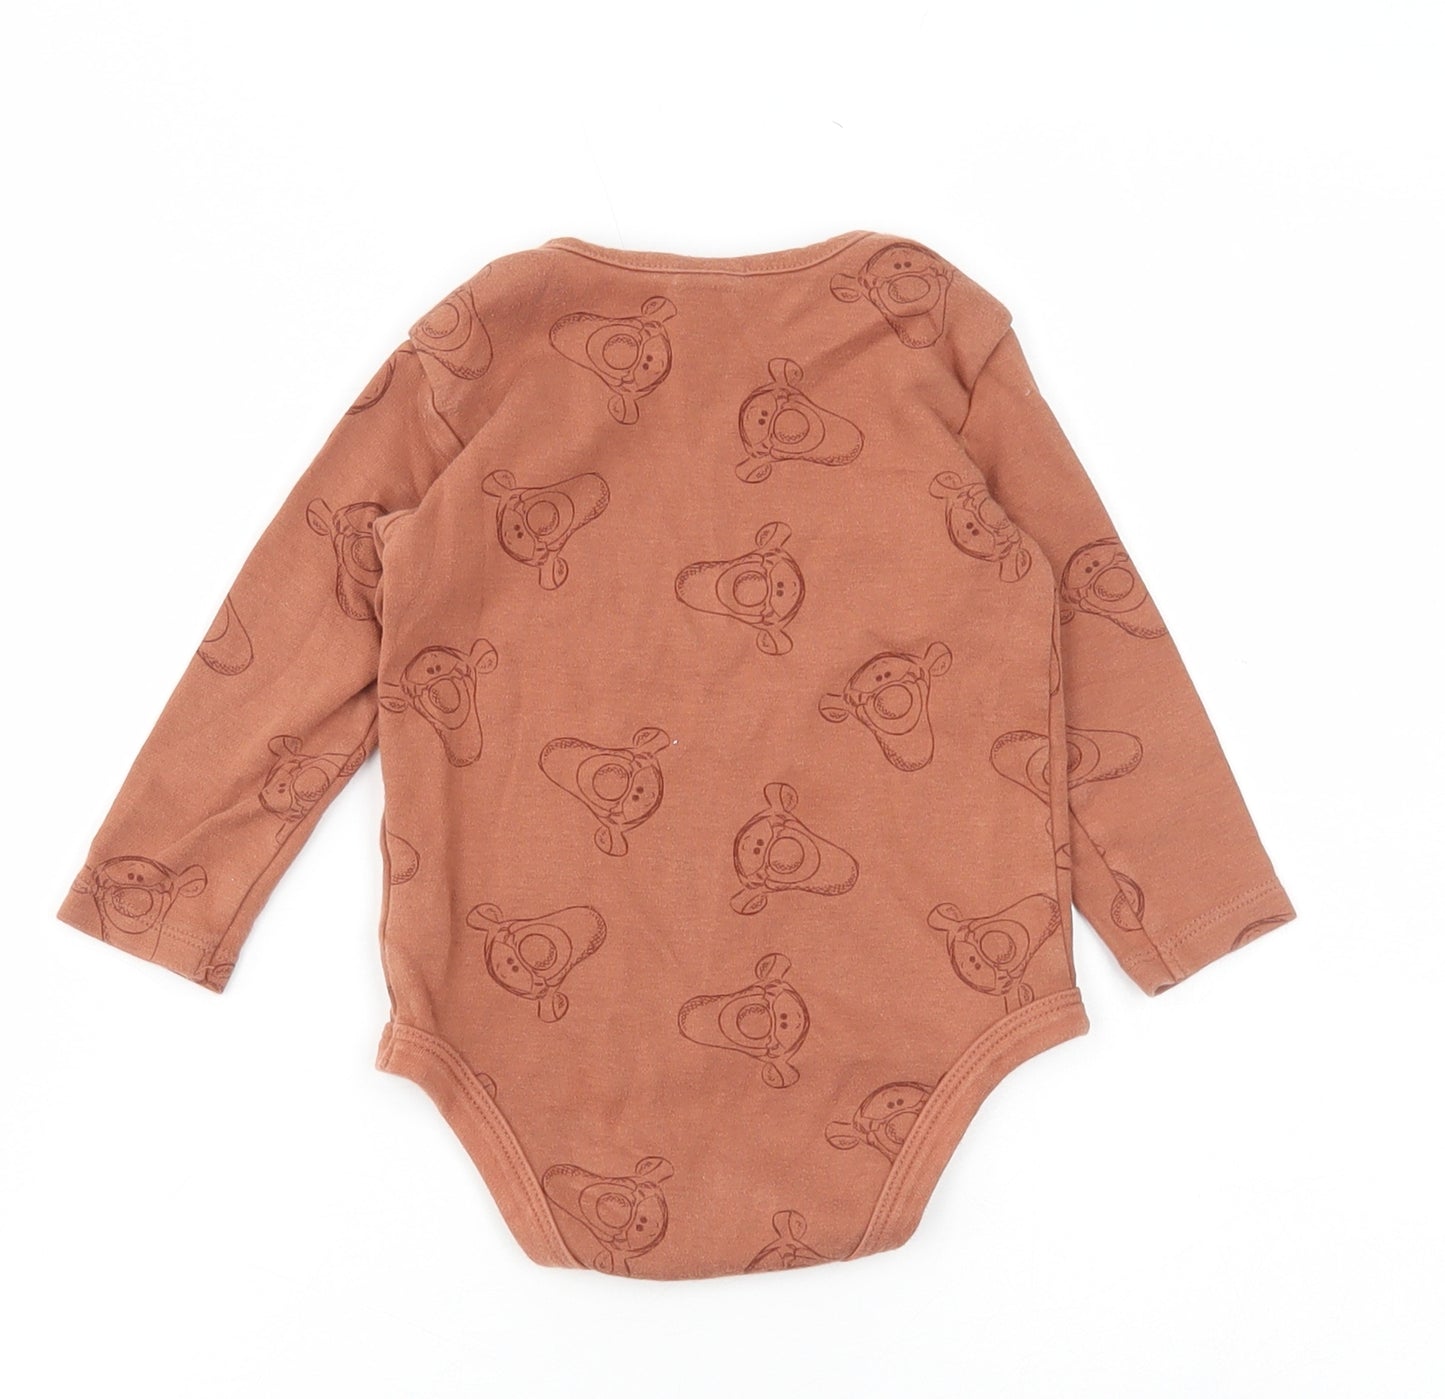 Disney Baby Baby Brown Geometric Cotton Bodysuit Outfit/Set Size 9-12 Months - Tigger